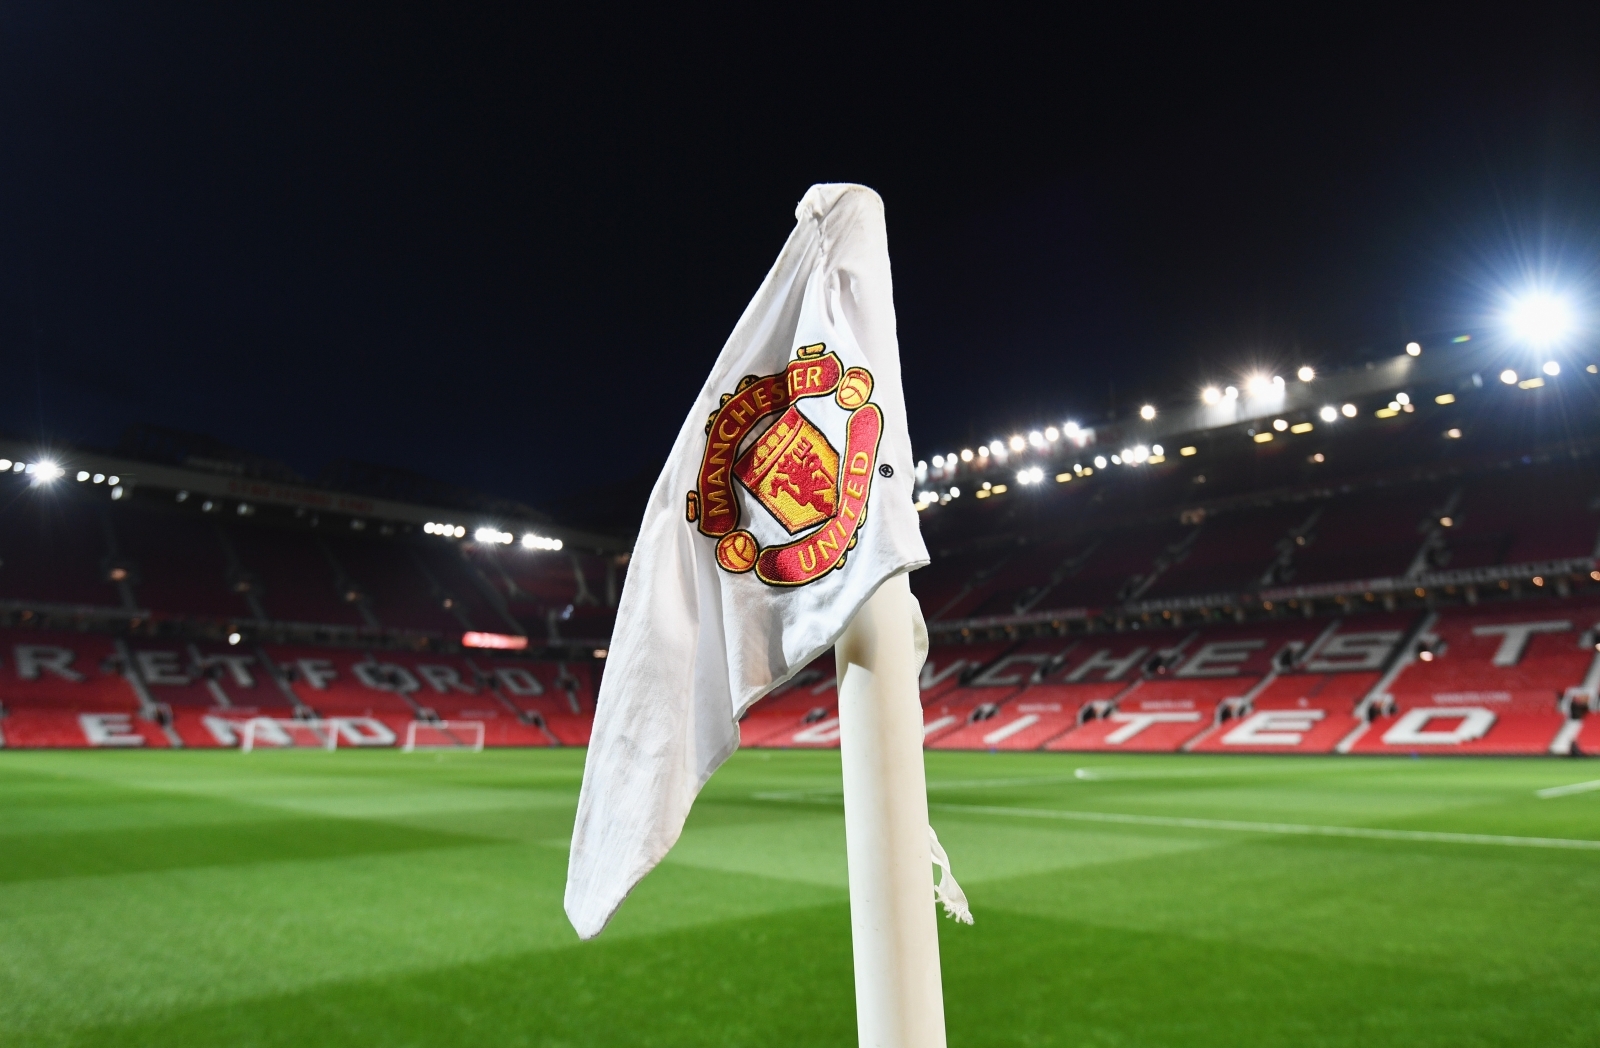 Man Utd : Manchester United FC New HD Wallpapers / The official